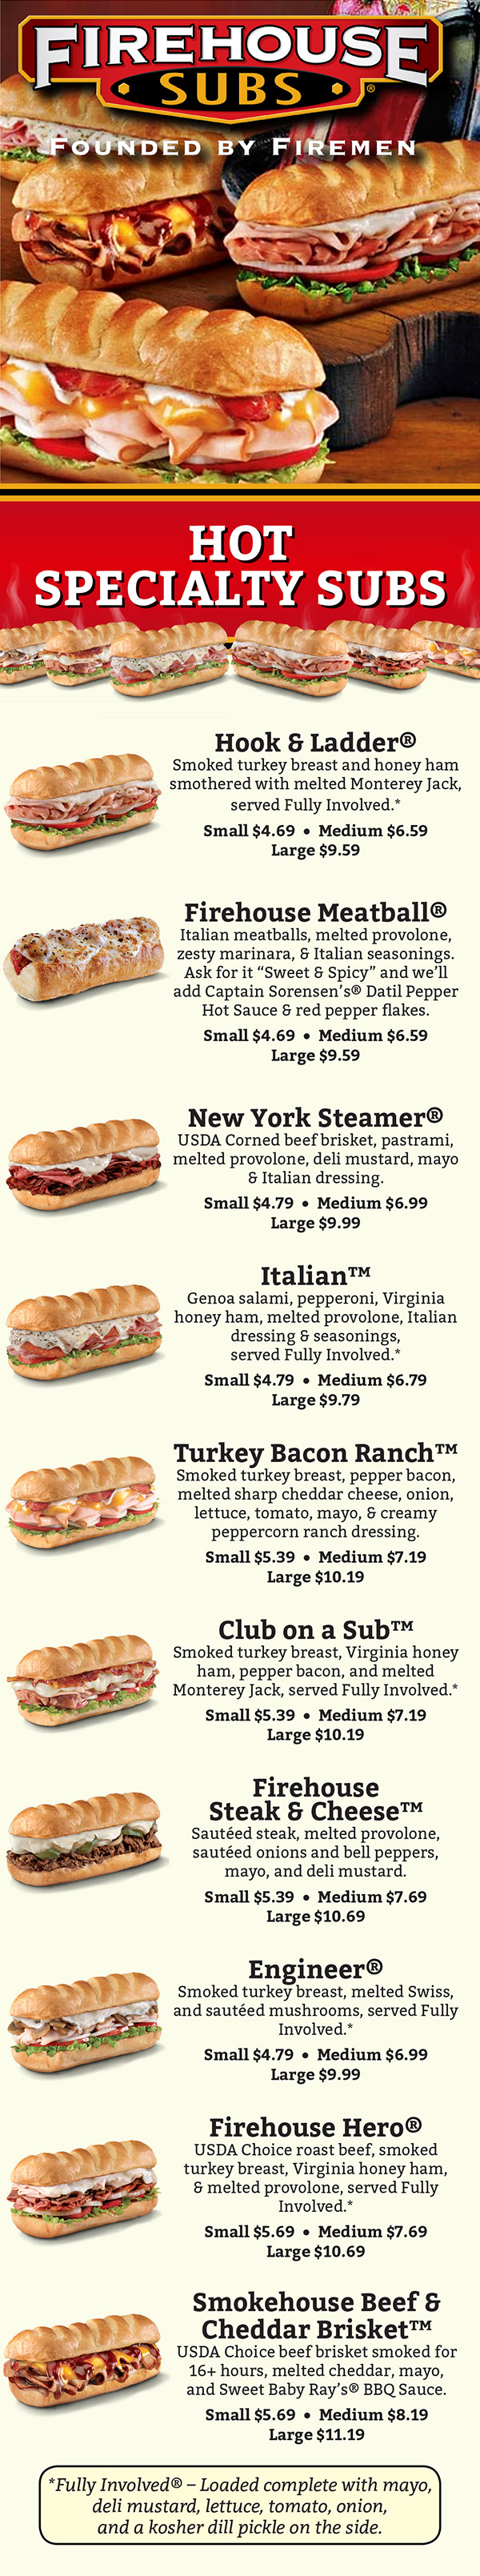 Firehouse Subs Menu - Lincoln Nebraska
HOT SPECIALTY SUBS

Hook & Ladder®
Smoked turkey breast, Virginia honey ham, and
melted Monterey Jack, served Fully Involved.*
Small $3.99 • Medium $6.19 • Large $9.19

Firehouse Meatball®
Italian meatballs, melted provolone,
zesty marinara, and Italian seasonings.
Ask for it “Sweet & Spicy” and we’ll add
Captain Sorensen’s® Datil Pepper Hot Sauce
and red pepper flakes.
Small $4.19 • Medium $6.19 • Large $9.19

New York Steamer®
USDA Corned beef brisket and pastrami, melted
provolone, deli mustard, mayo, and Italian dressing.
Small $4.59 • Medium $6.59 • Large $9.59

Italian™
Genoa salami, pepperoni, Virginia honey ham,
melted provolone, Italian dressing, and seasonings,
served Fully Involved.*
Small $4.39 • Medium $6.39 • Large $9.39

Turkey Bacon Ranch™
Smoked turkey breast, pepper bacon, melted sharp
cheddar cheese, onion, lettuce, tomato, mayo,
and creamy peppercorn ranch dressing.
Small $4.99 • Medium $6.99 • Large $9.99

Club on a Sub™
Smoked turkey breast, Virginia honey ham,
pepper bacon, and melted Monterey Jack,
served Fully Involved.*
Small $4.99 • Medium $6.99 • Large $9.99

Firehouse Steak & Cheese™
Sautéed steak, melted provolone, sautéed onions
and bell peppers, mayo, and deli mustard.
Small $5.09 • Medium $7.09 • Large $10.09

Engineer®
Smoked turkey breast, melted Swiss, and sautéed
mushrooms, served Fully Involved.*
Small $4.59 • Medium $6.59 • Large $9.59

Firehouse Hero®
USDA Choice roast beef, smoked turkey breast,
Virginia honey ham, and melted provolone,
served Fully Involved.*
Small $5.09 • Medium $7.09 • Large $10.09

Smokehouse Beef &
Cheddar Brisket™
USDA Choice beef brisket smoked for
16+ hours, melted cheddar, mayo,
and Sweet Baby Ray’s® BBQ Sauce.
Small $5.39 • Medium $7.39 • Large $10.39

*Fully Involved® – Loaded complete with mayo,
deli mustard, lettuce, tomato, onion,
and a kosher dill pickle on the side.

MAKE YOUR OWN SUB
Enjoy on of our hot, high-quality meats; cold tuna;
or veggie with your choice of cheese. Served Fully
Involved* on a white or wheat sub roll.

Smoked Turkey Breast
Virginia Honey Ham
Pastrami
Corned Beef Brisket
Premium Roast Beef
Grilled Chicken Breast
Tuna Salad
Veggie
Small $4.19 - $5.09
Medium $6.19 - $7.09
Large $9.19 - $10.09

Add-Ons
Extra Cheese $.50 - $.75
Pepper Bacon $1.00 - $1.50
Mushrooms $.50 - $.75

Order Any Hot Sub Cold
Did you know?
You can order any of our hot subs cold!
Just let us know when you order and we won’t heat
the meat & cheese. Then we’ll pile it all high on our
private recipe toasted sub roll. Delicious, and just
the way you want it.

*Fully Involved® – Loaded complete with mayo,
deli mustard, lettuce, tomato, onion,
and a kosher dill pickle on the side.

CHILI & SOUPS
Firehouse Chili $3.99
Award-Winning
Chicken Noodle $3.99
Broccoli Cheese $3.99

SIDES
Side Salad $3.99
Cookie $.85
Brownie $1.39
Chips $1.09

KIDS’ COMBOS
Meatball $4.09
Turkey & Provolone $4.09
Ham & Provolone $4.09
Grilled Cheddar Cheese $4.09
Includes 12 oz. fountain drink, dessert, and fire hat.

BEVERAGES
Enjoy Coca-Cola Freestyle®
fountain beverages,
our exclusive Cherry Lime-Aid™
or our freshly brewed ice tea.
Small $1.89 • Medium $1.99
Large $2.29 • Bottle $1.99

Firehouse Salad®
Choose from smoked turkey breast,
grilled chicken breast,
or Virginia honey ham.
$5.49 - $7.99
No Meat $5.49

Italian with
Grilled Chicken Salad™
Salami & grilled chicken breast.
$7.99

Hook & Ladder Salad®
Smoked turkey breast
& Virginia honey ham
$7.99

Dressings: Light Italian, Honey Mustard, Balsamic
Vinaigrette, Peppercorn Ranch, Oil and Vinegar

MAKE IT A COMBO
WITH ANY SIZE DRINK
Plus your choice of Chips or a Cookie
$2.49 - $3.99

Or swap your side for Chili, a Side Salad, Soup,
or a Brownie for an additional cost.

CHOPPED SALADS
Romaine, tomato, green bell pepper, cucumber,
mozzarella, and pepperoncini